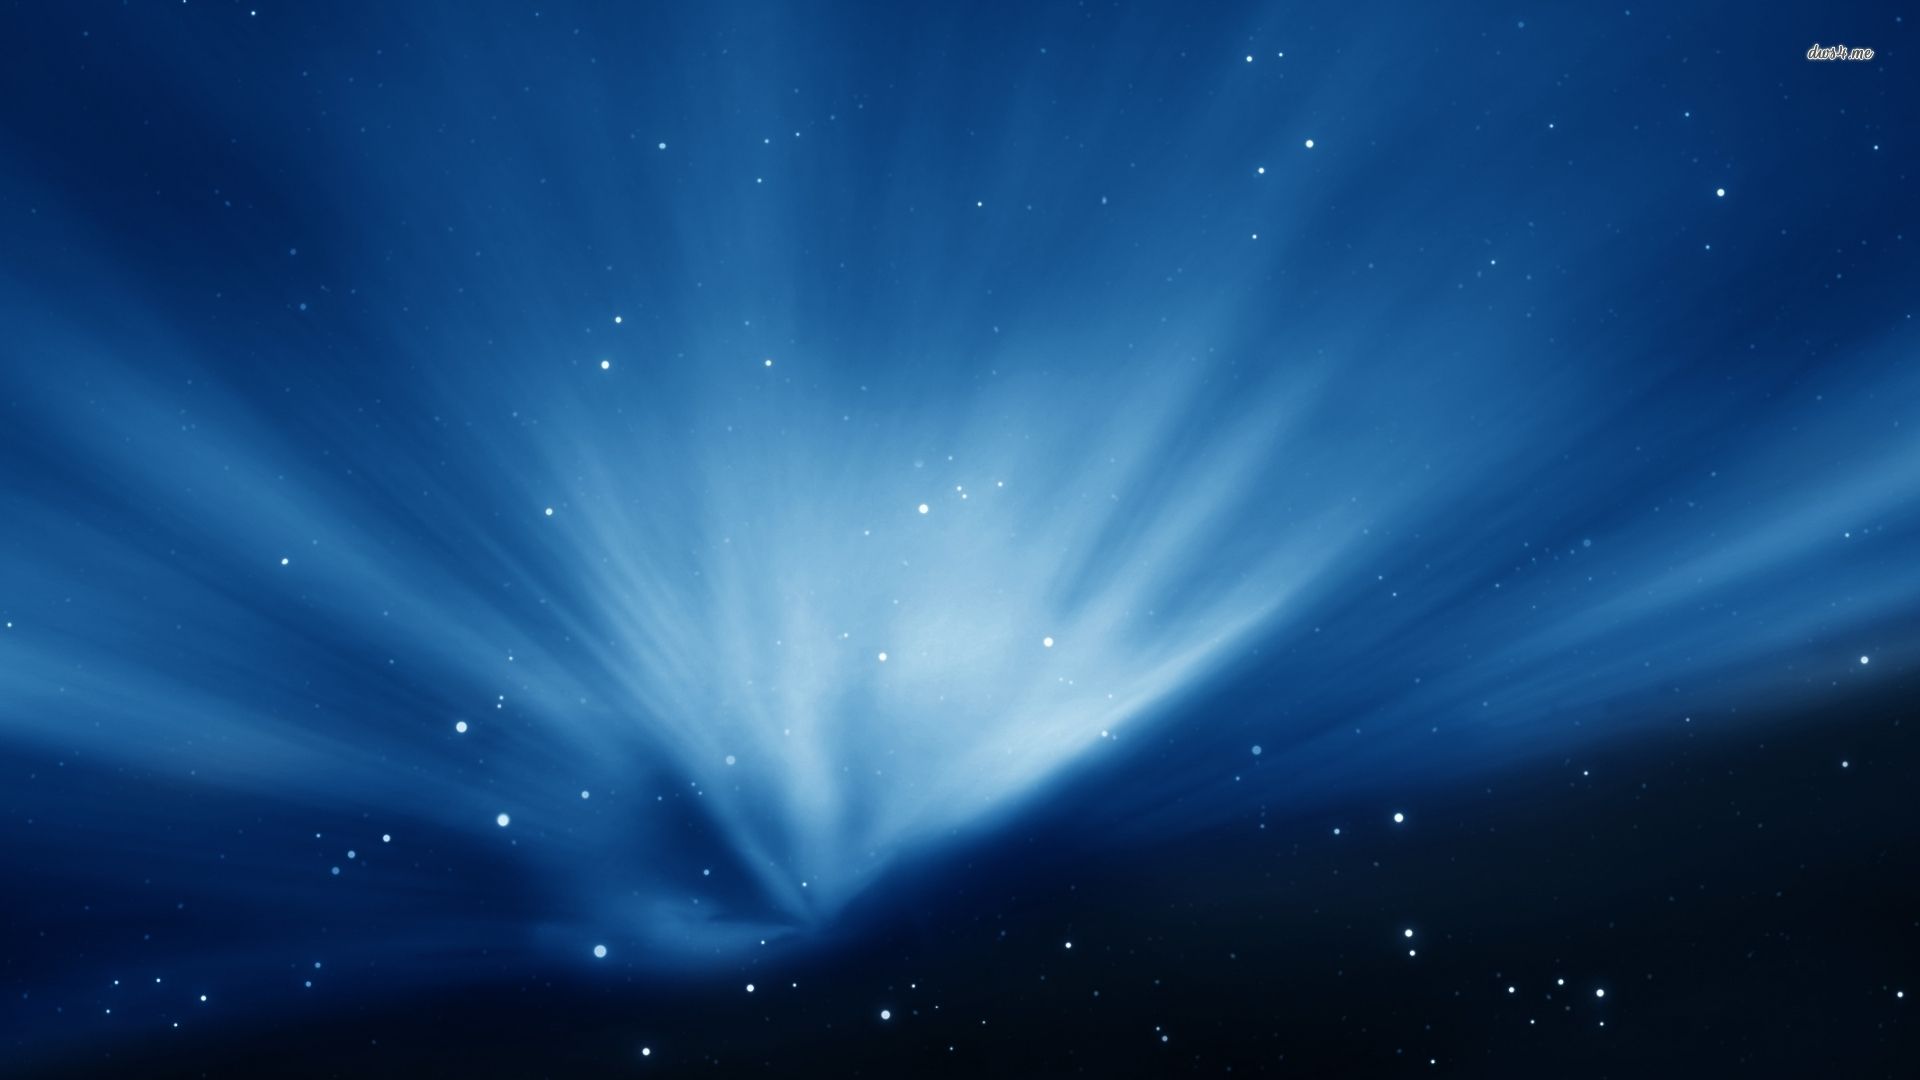 Blue light in space wallpaper - Abstract wallpapers - #9431